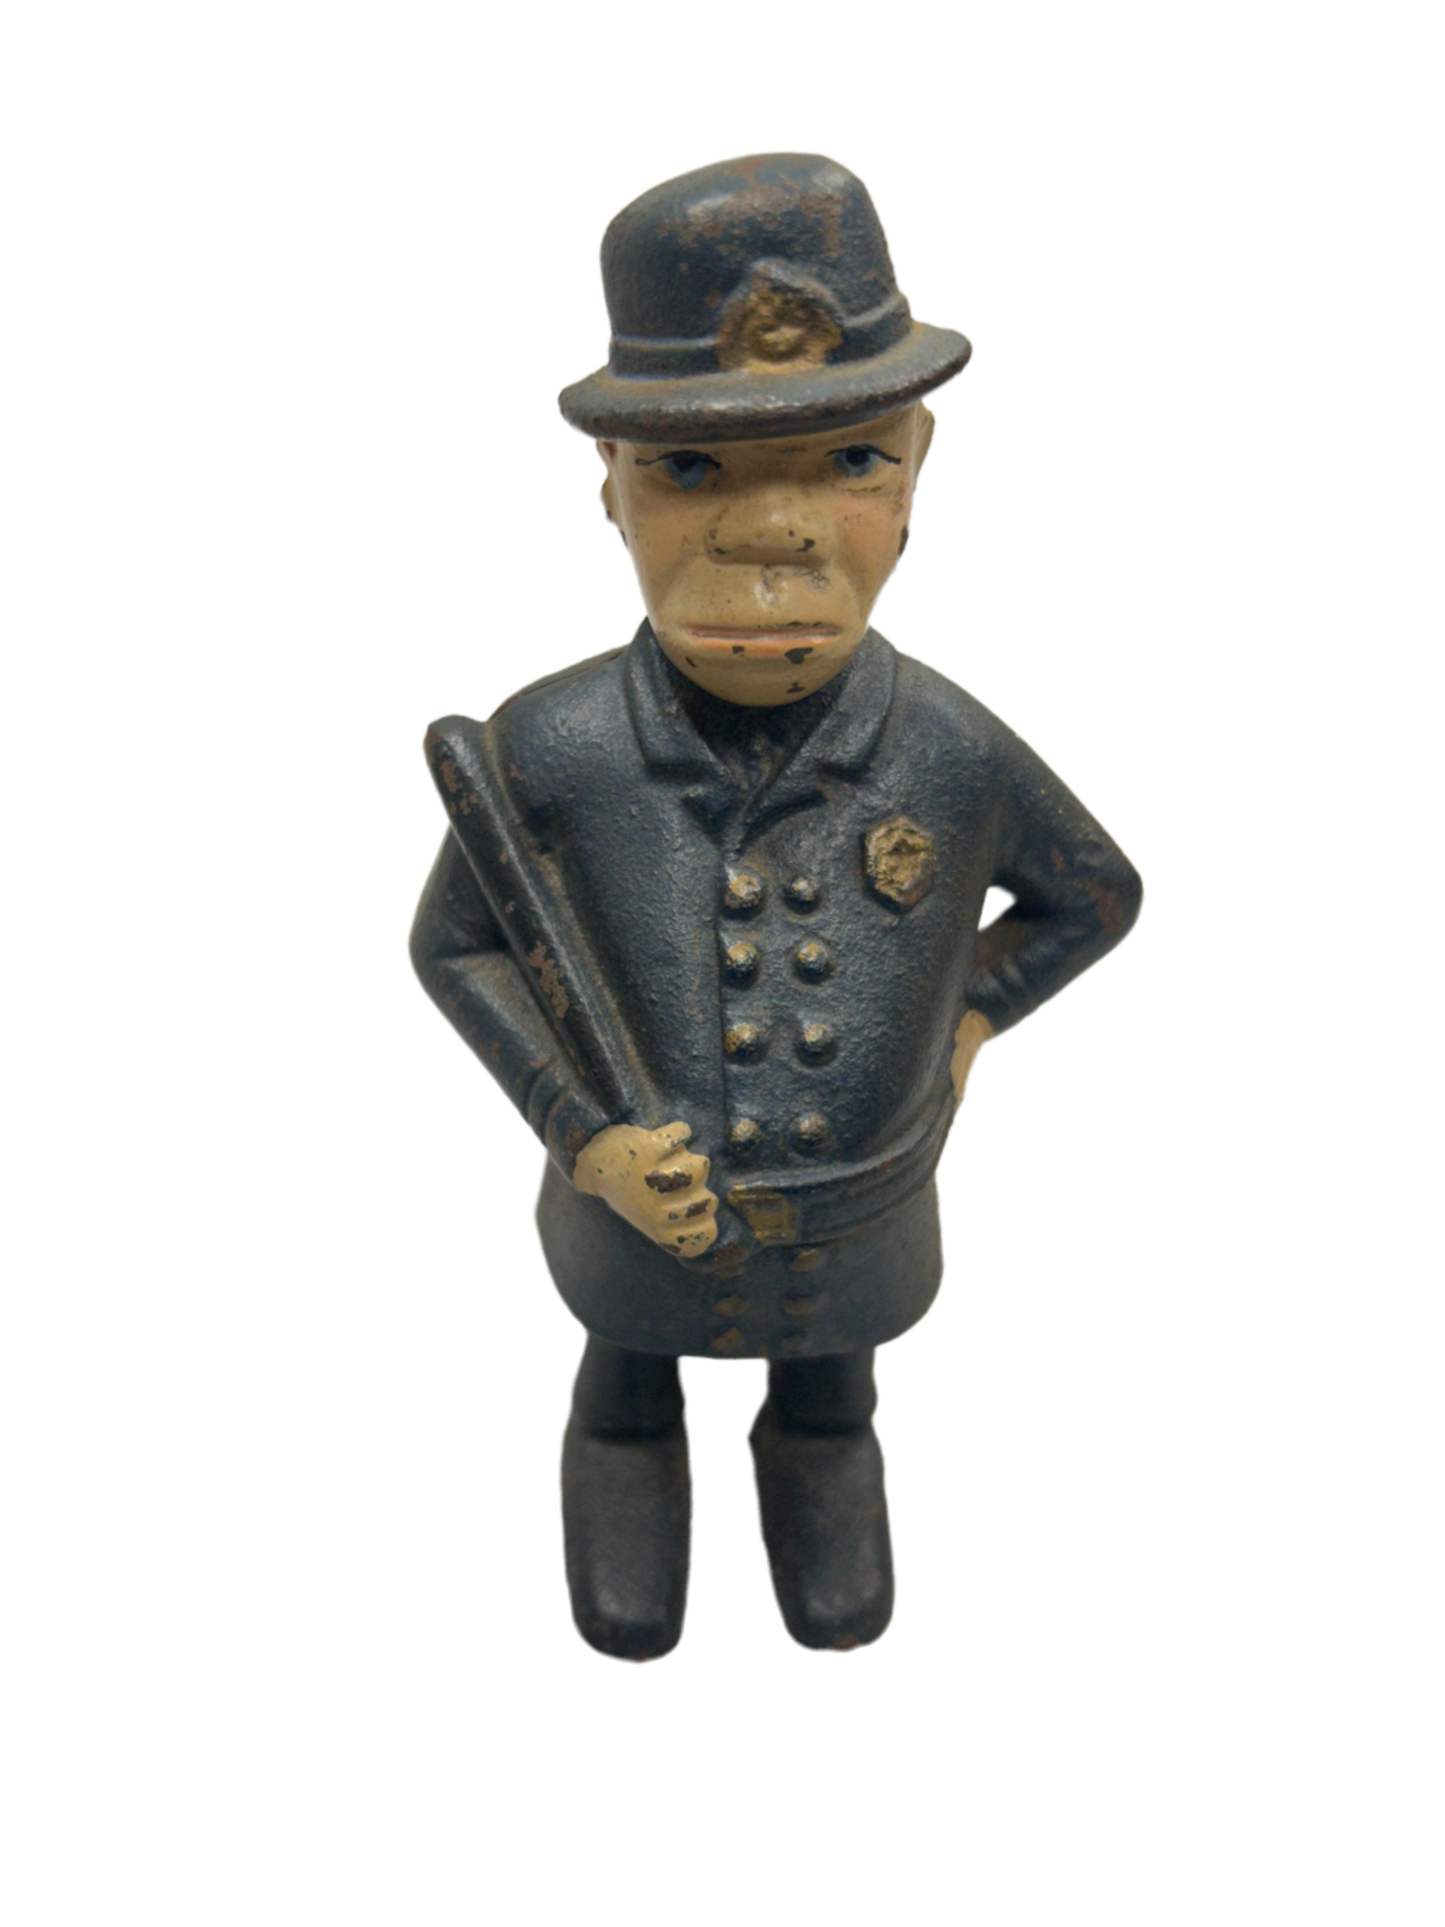 This artifact, blending wood and metal, mirrors the authoritative stance of a police officer. With its sleeve-like design, it represents resilience and cultural significance. Available at the hearing clinic at Allard Audiology.